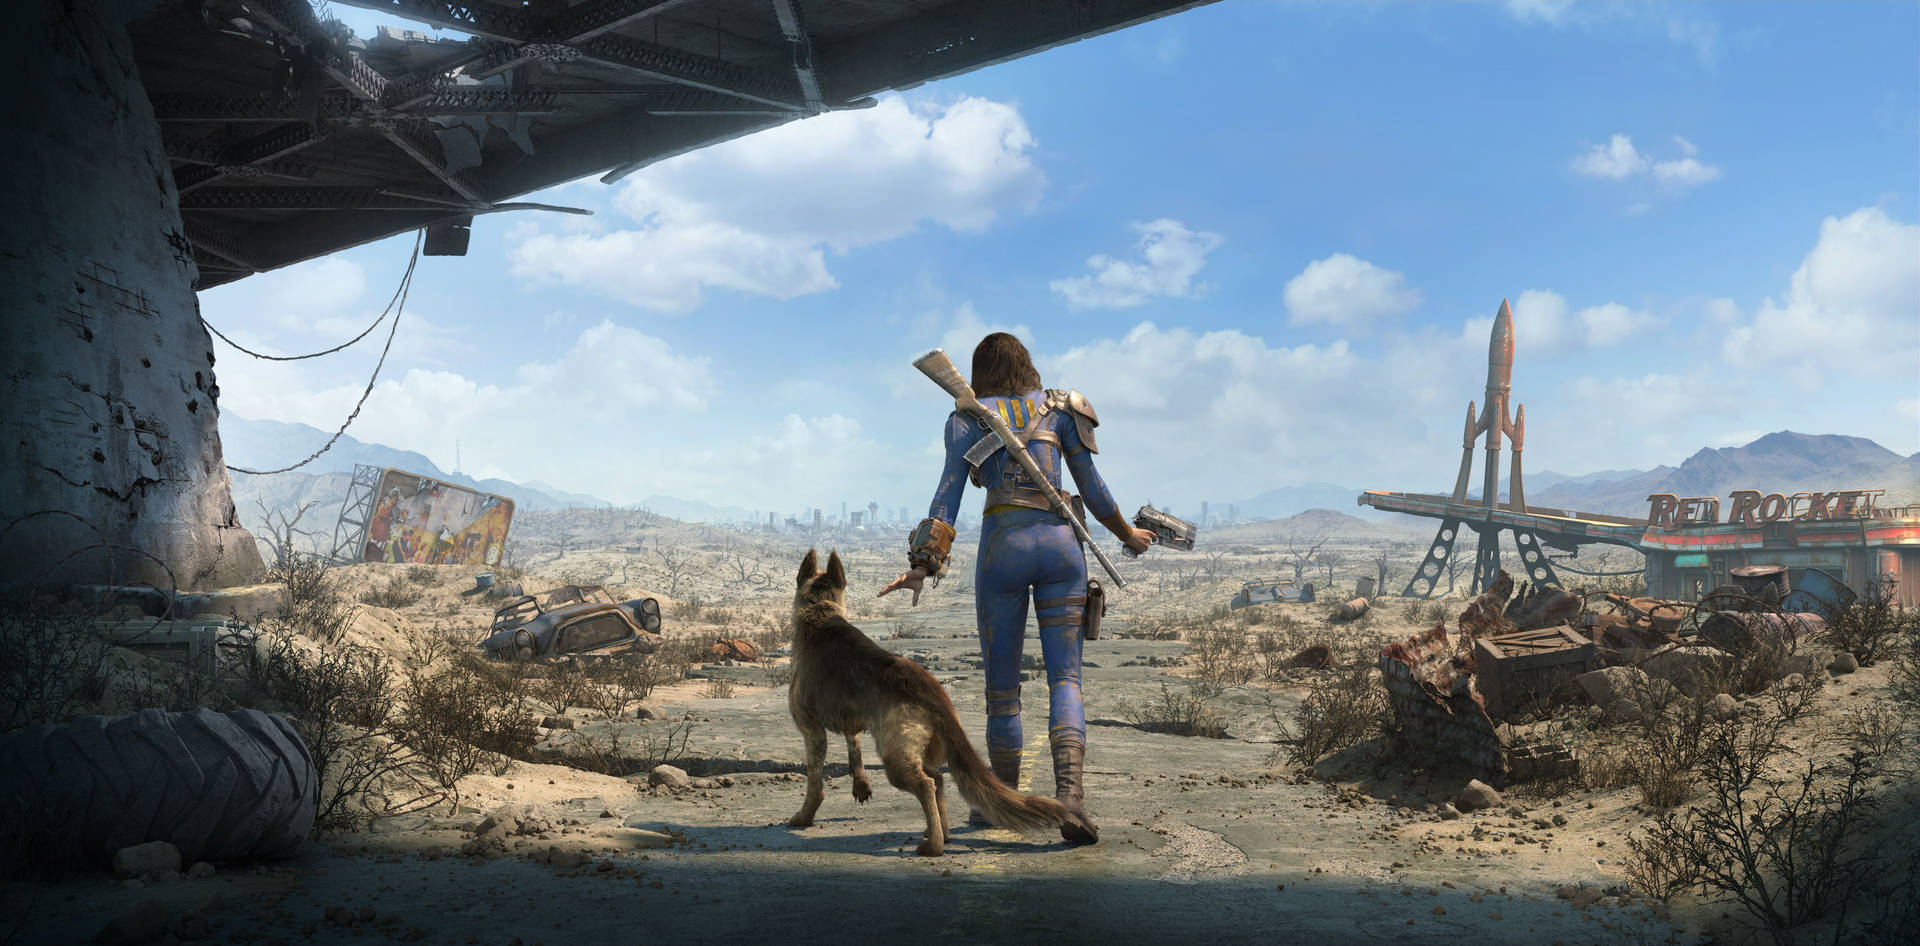 The Sole Survivor, braving the wasteland in Fallout 4 Wallpaper